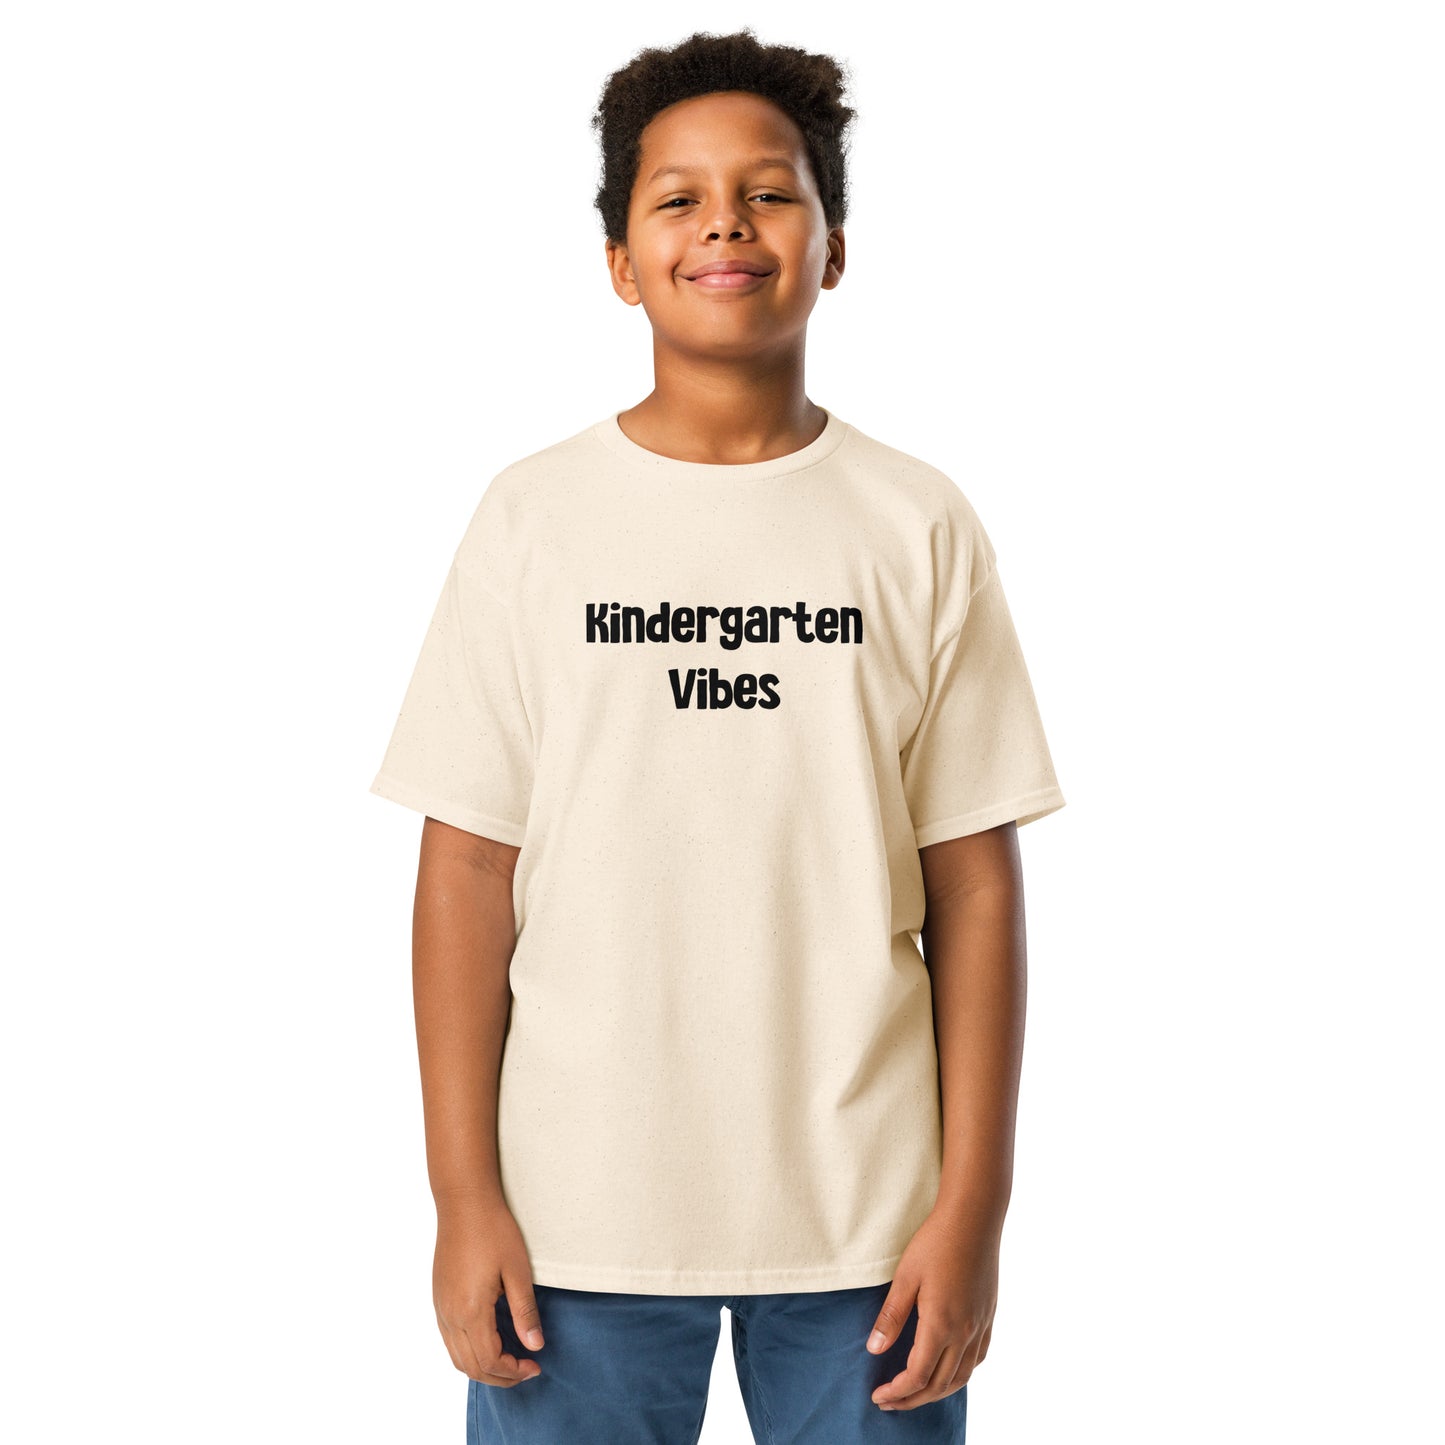 Youth Kindergarten Vibes T Shirts